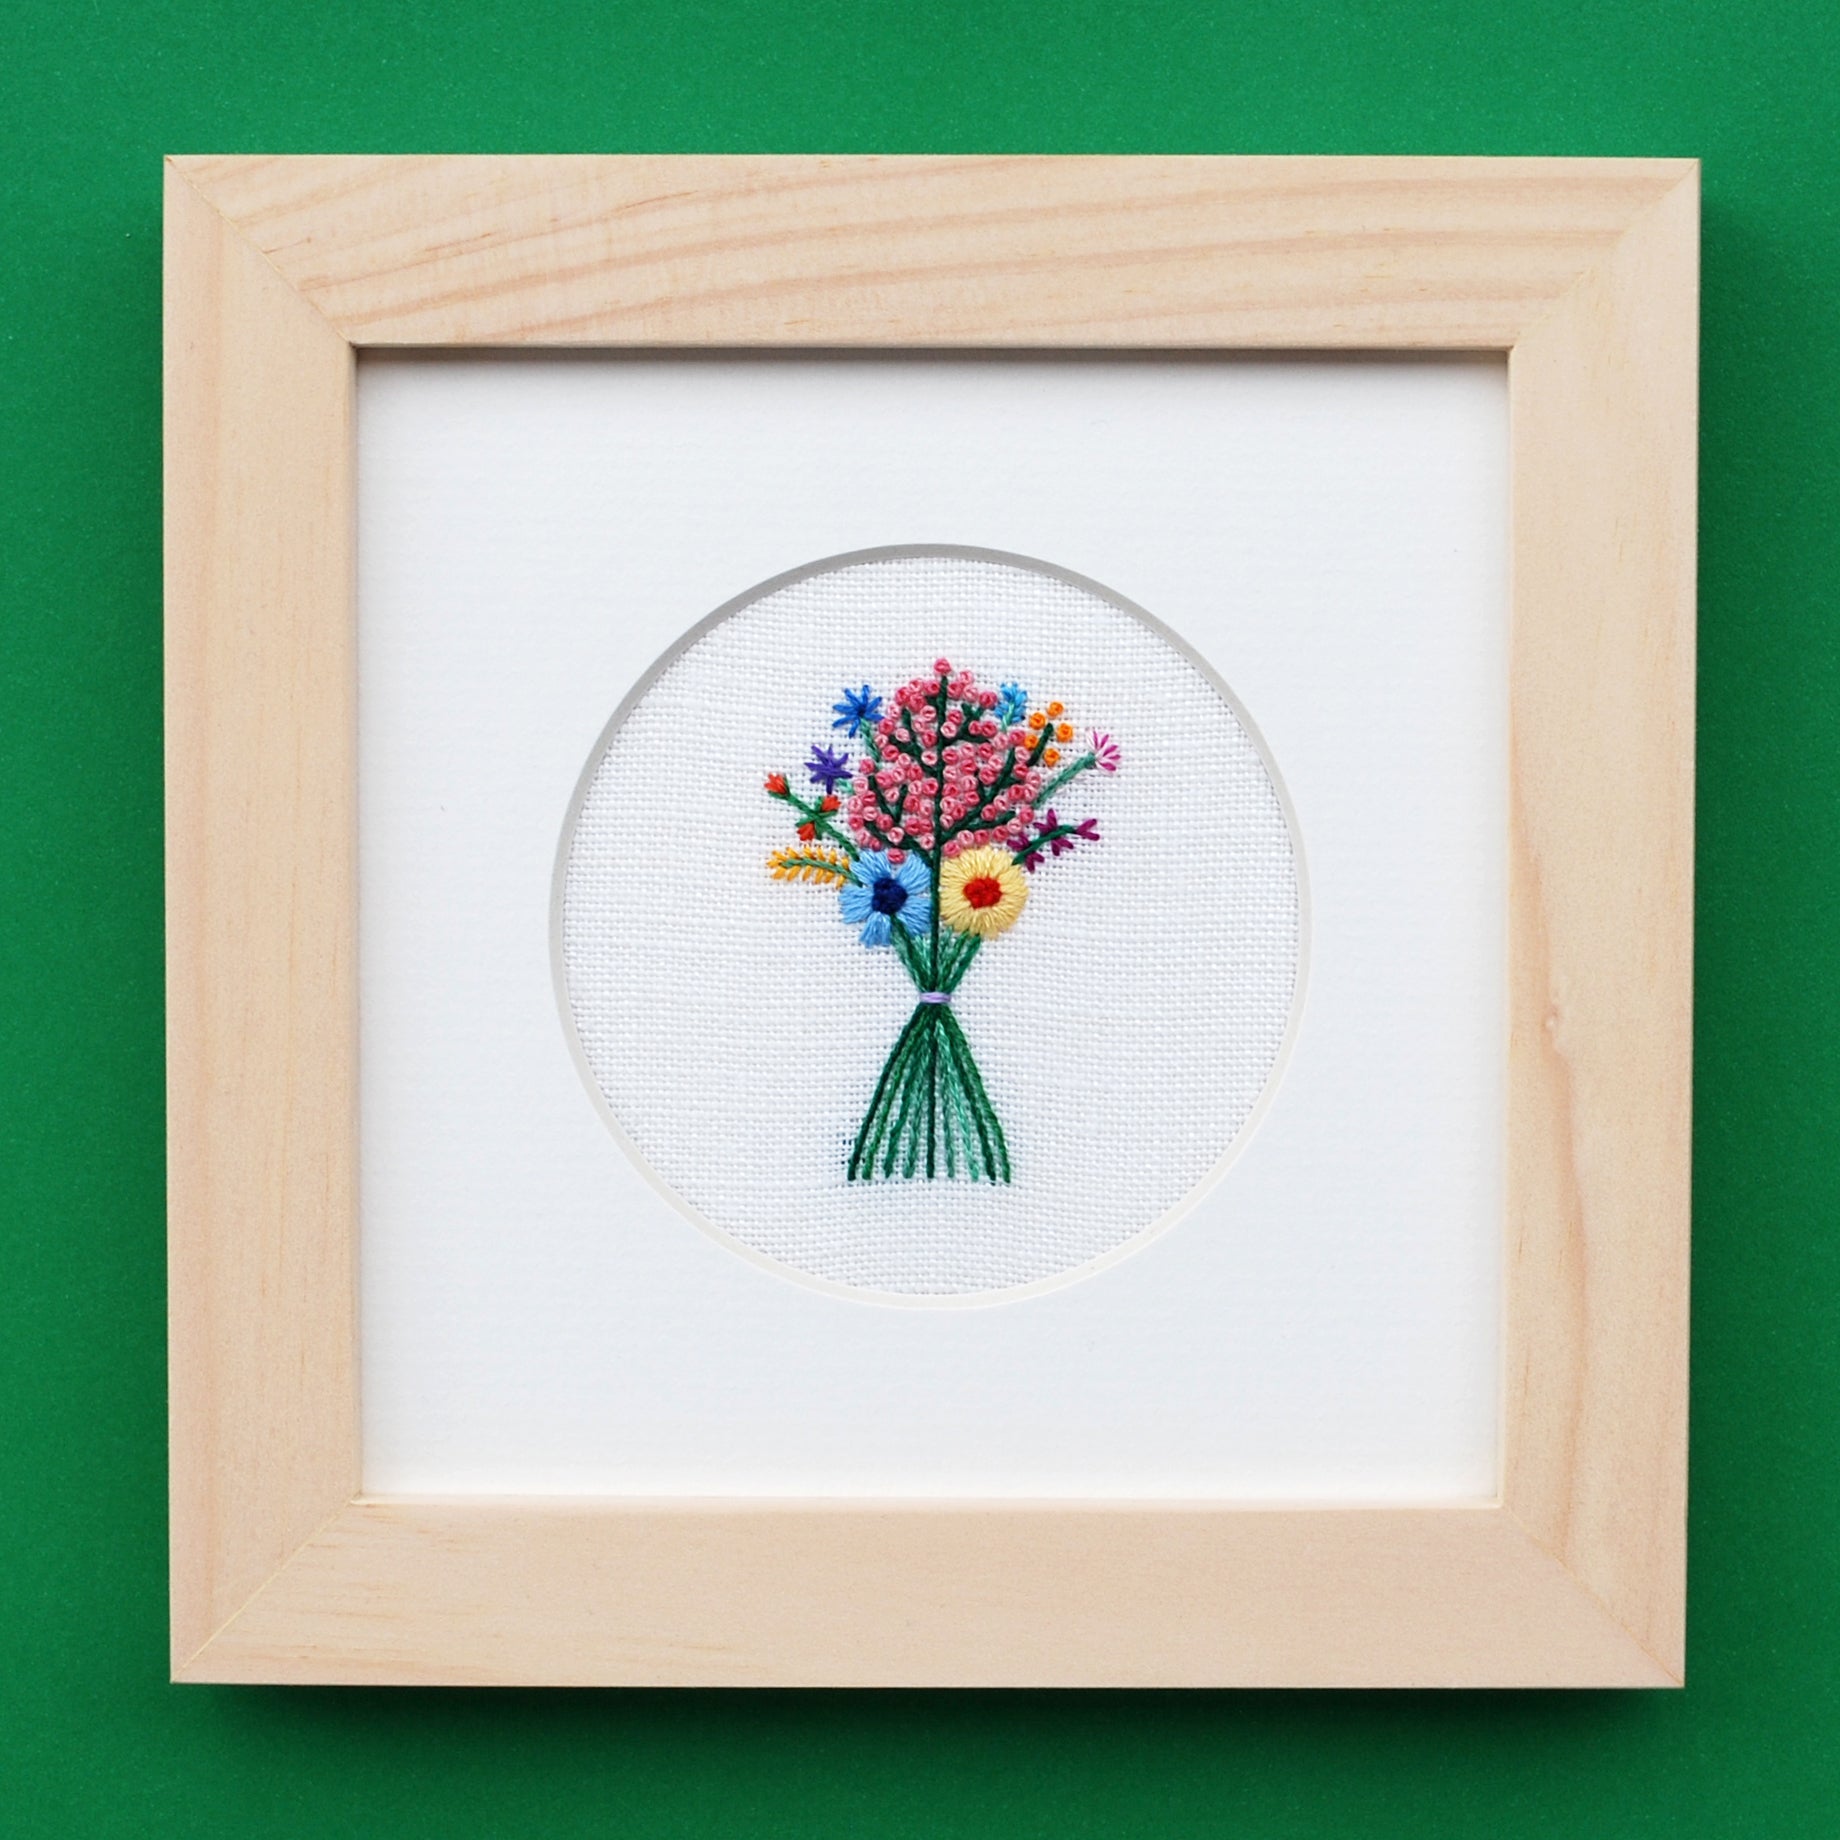 Rainbow Bouquet with Pink Buds on Cream Linen Hand Embroidered Art